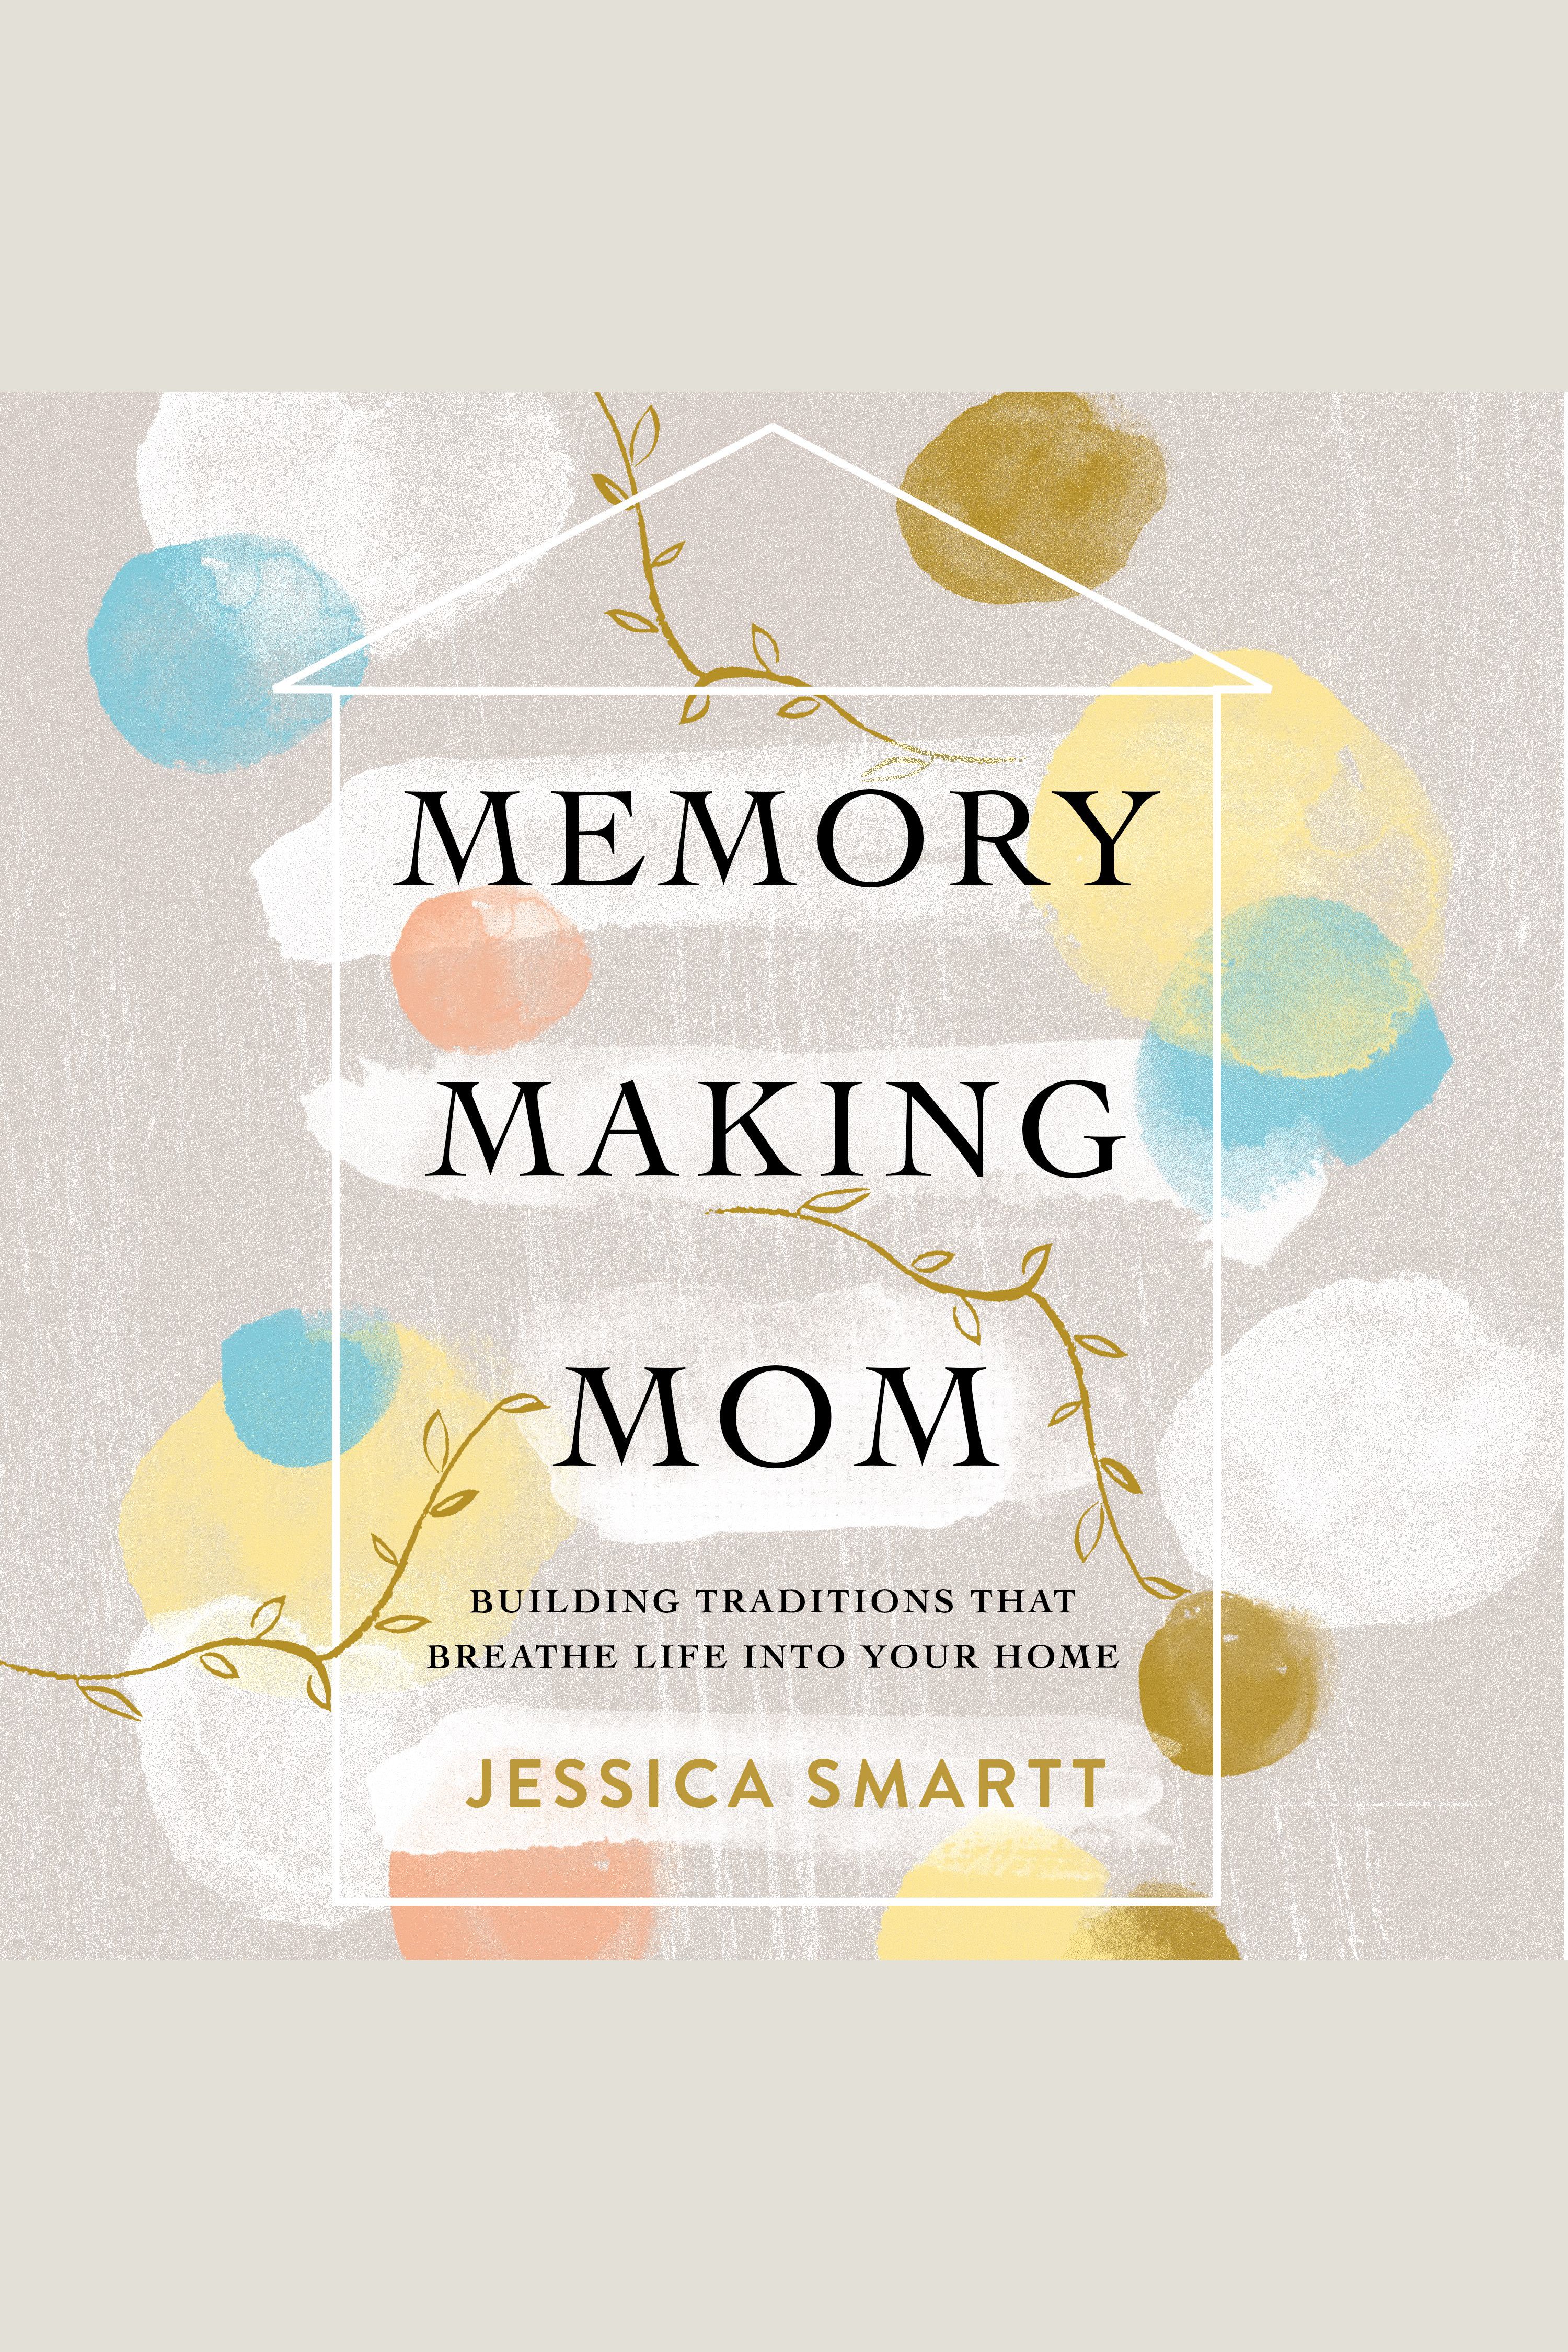 Memory-Making Mom Building Traditions That Breathe Life Into Your Home cover image